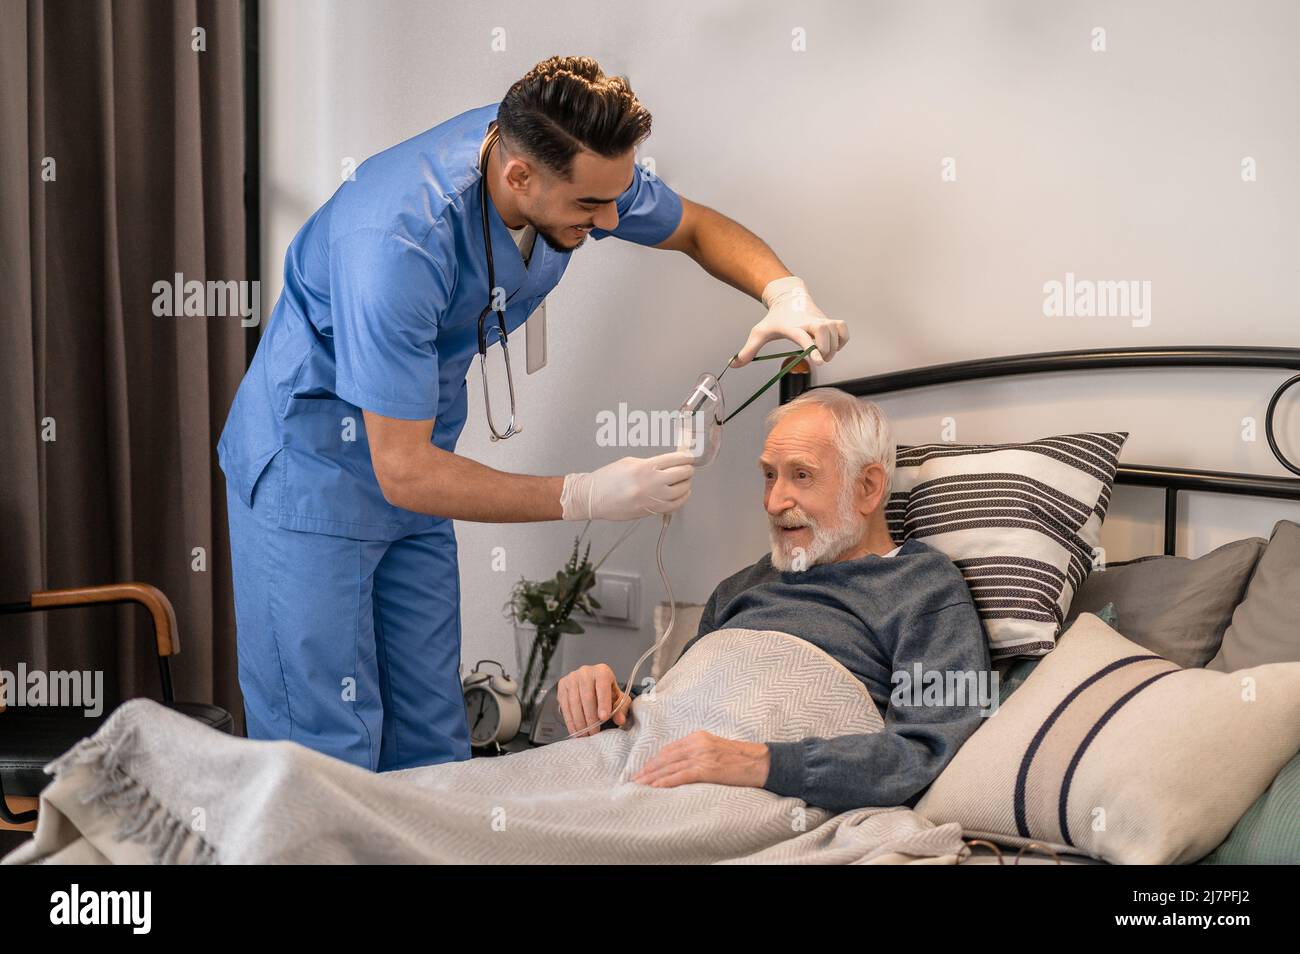 Healthcare professional preparing an aged patient for a medical procedure Stock Photo